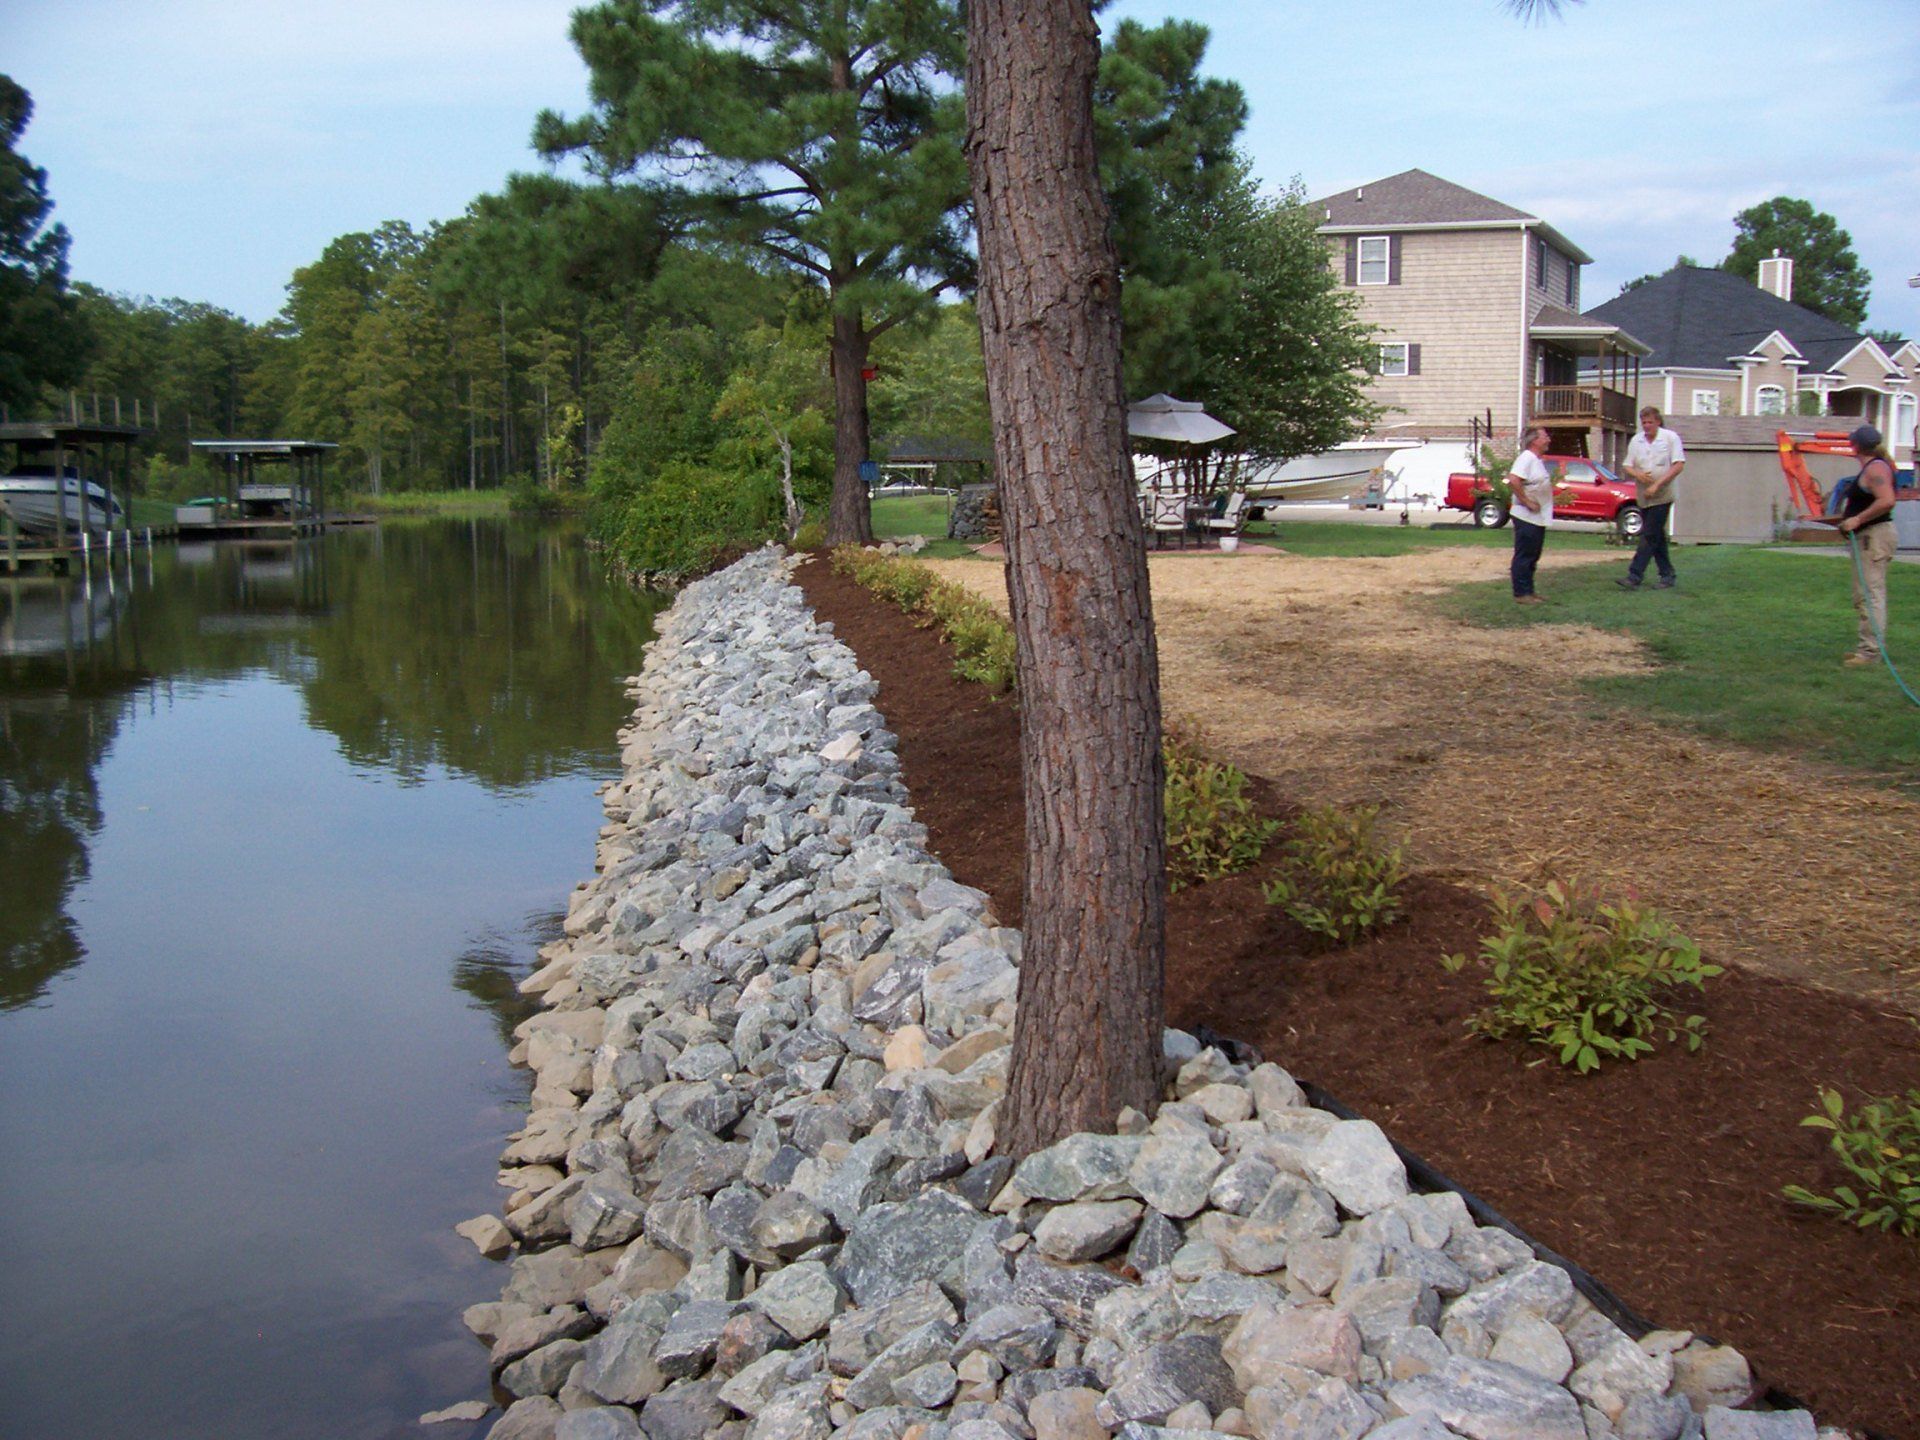 Landscaping Erosion Control — Housing Community With Lake On Side in Shacklefords, VA